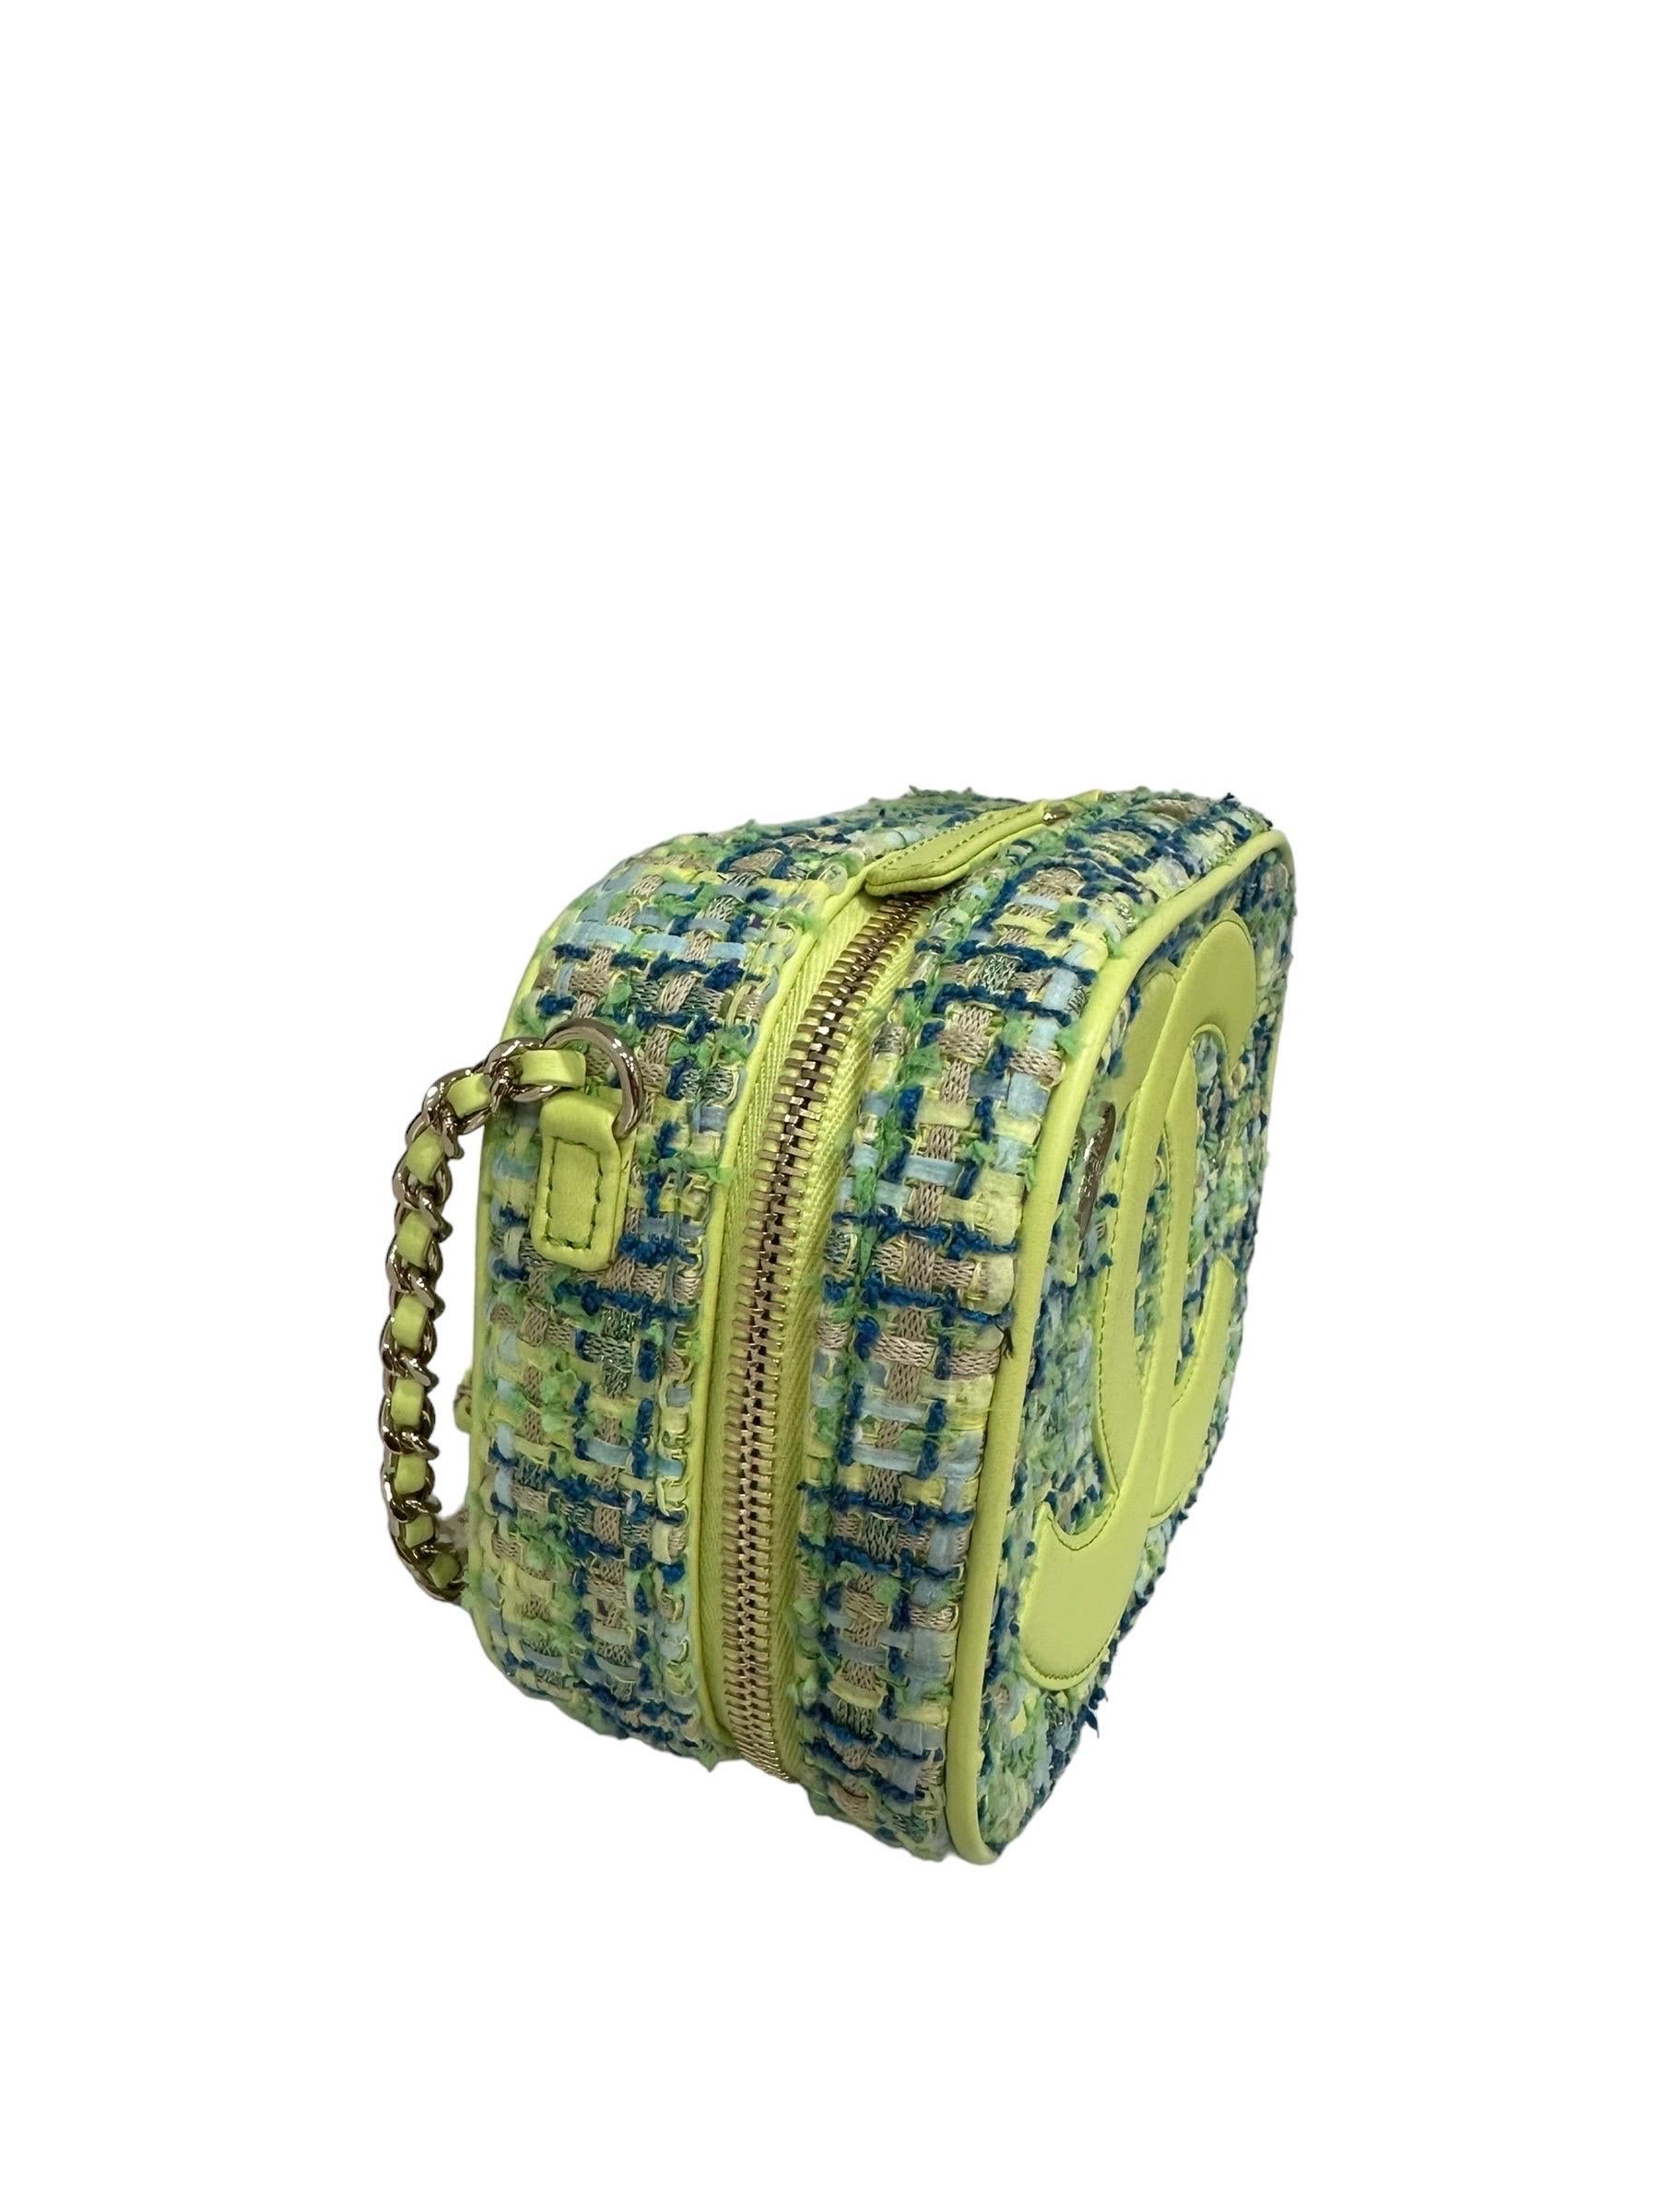 Borsa A Tracolla Chanel Camera Bag Tweed Lime 2019 For Sale 1